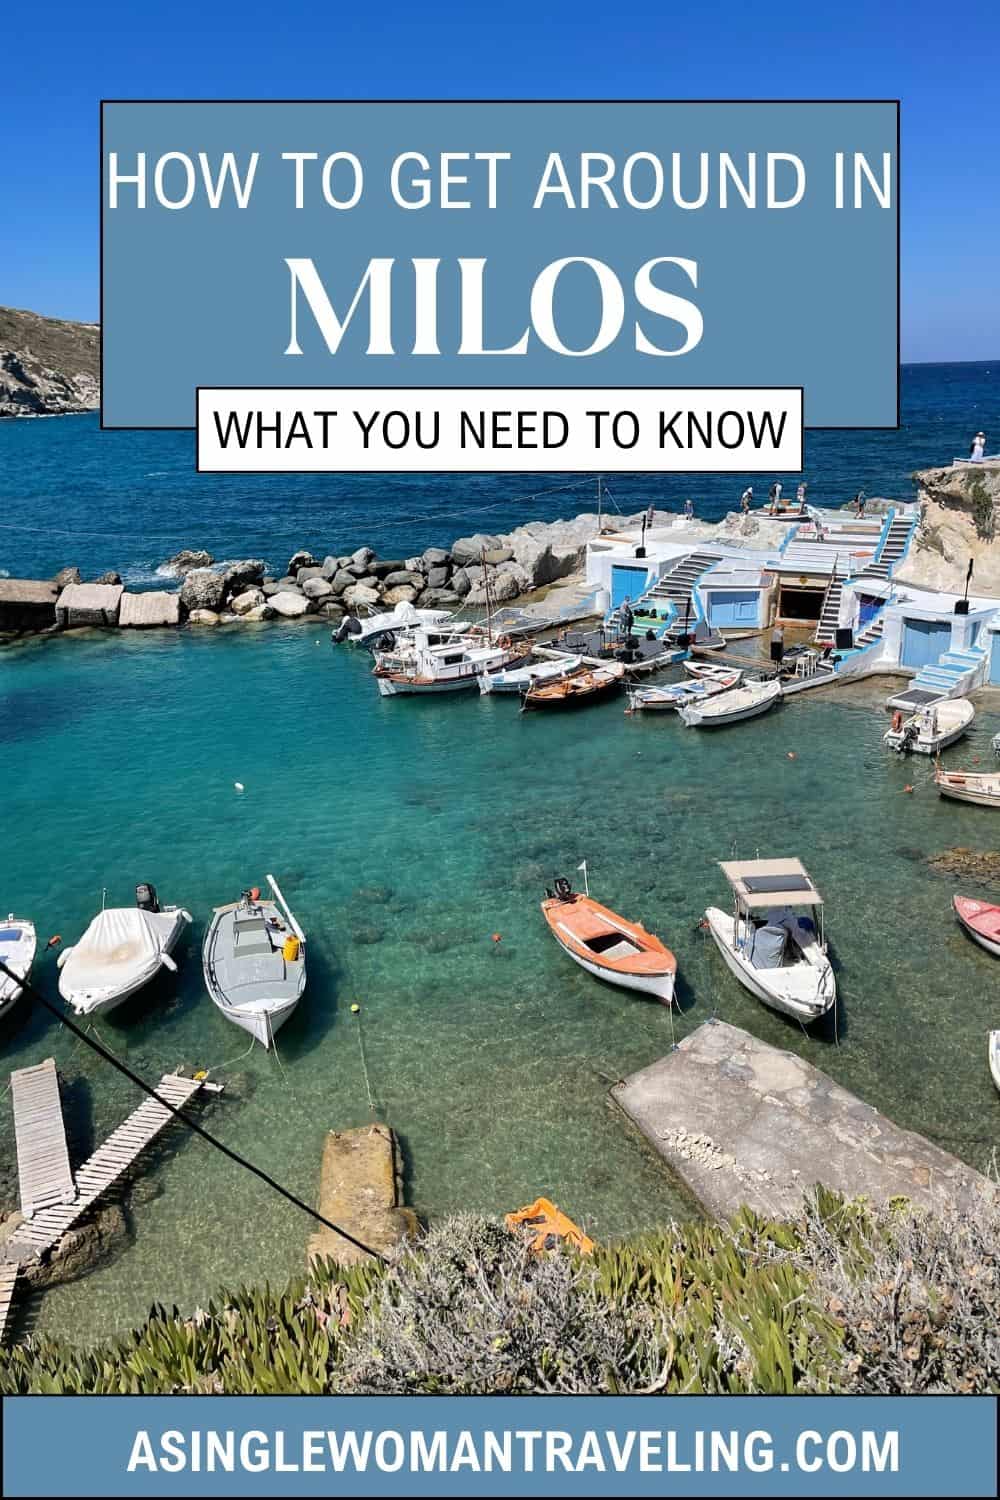 A picturesque harbor with clear blue waters and moored boats in Milos, overlaid with text 'How to Get Around in Milos - What You Need to Know' 